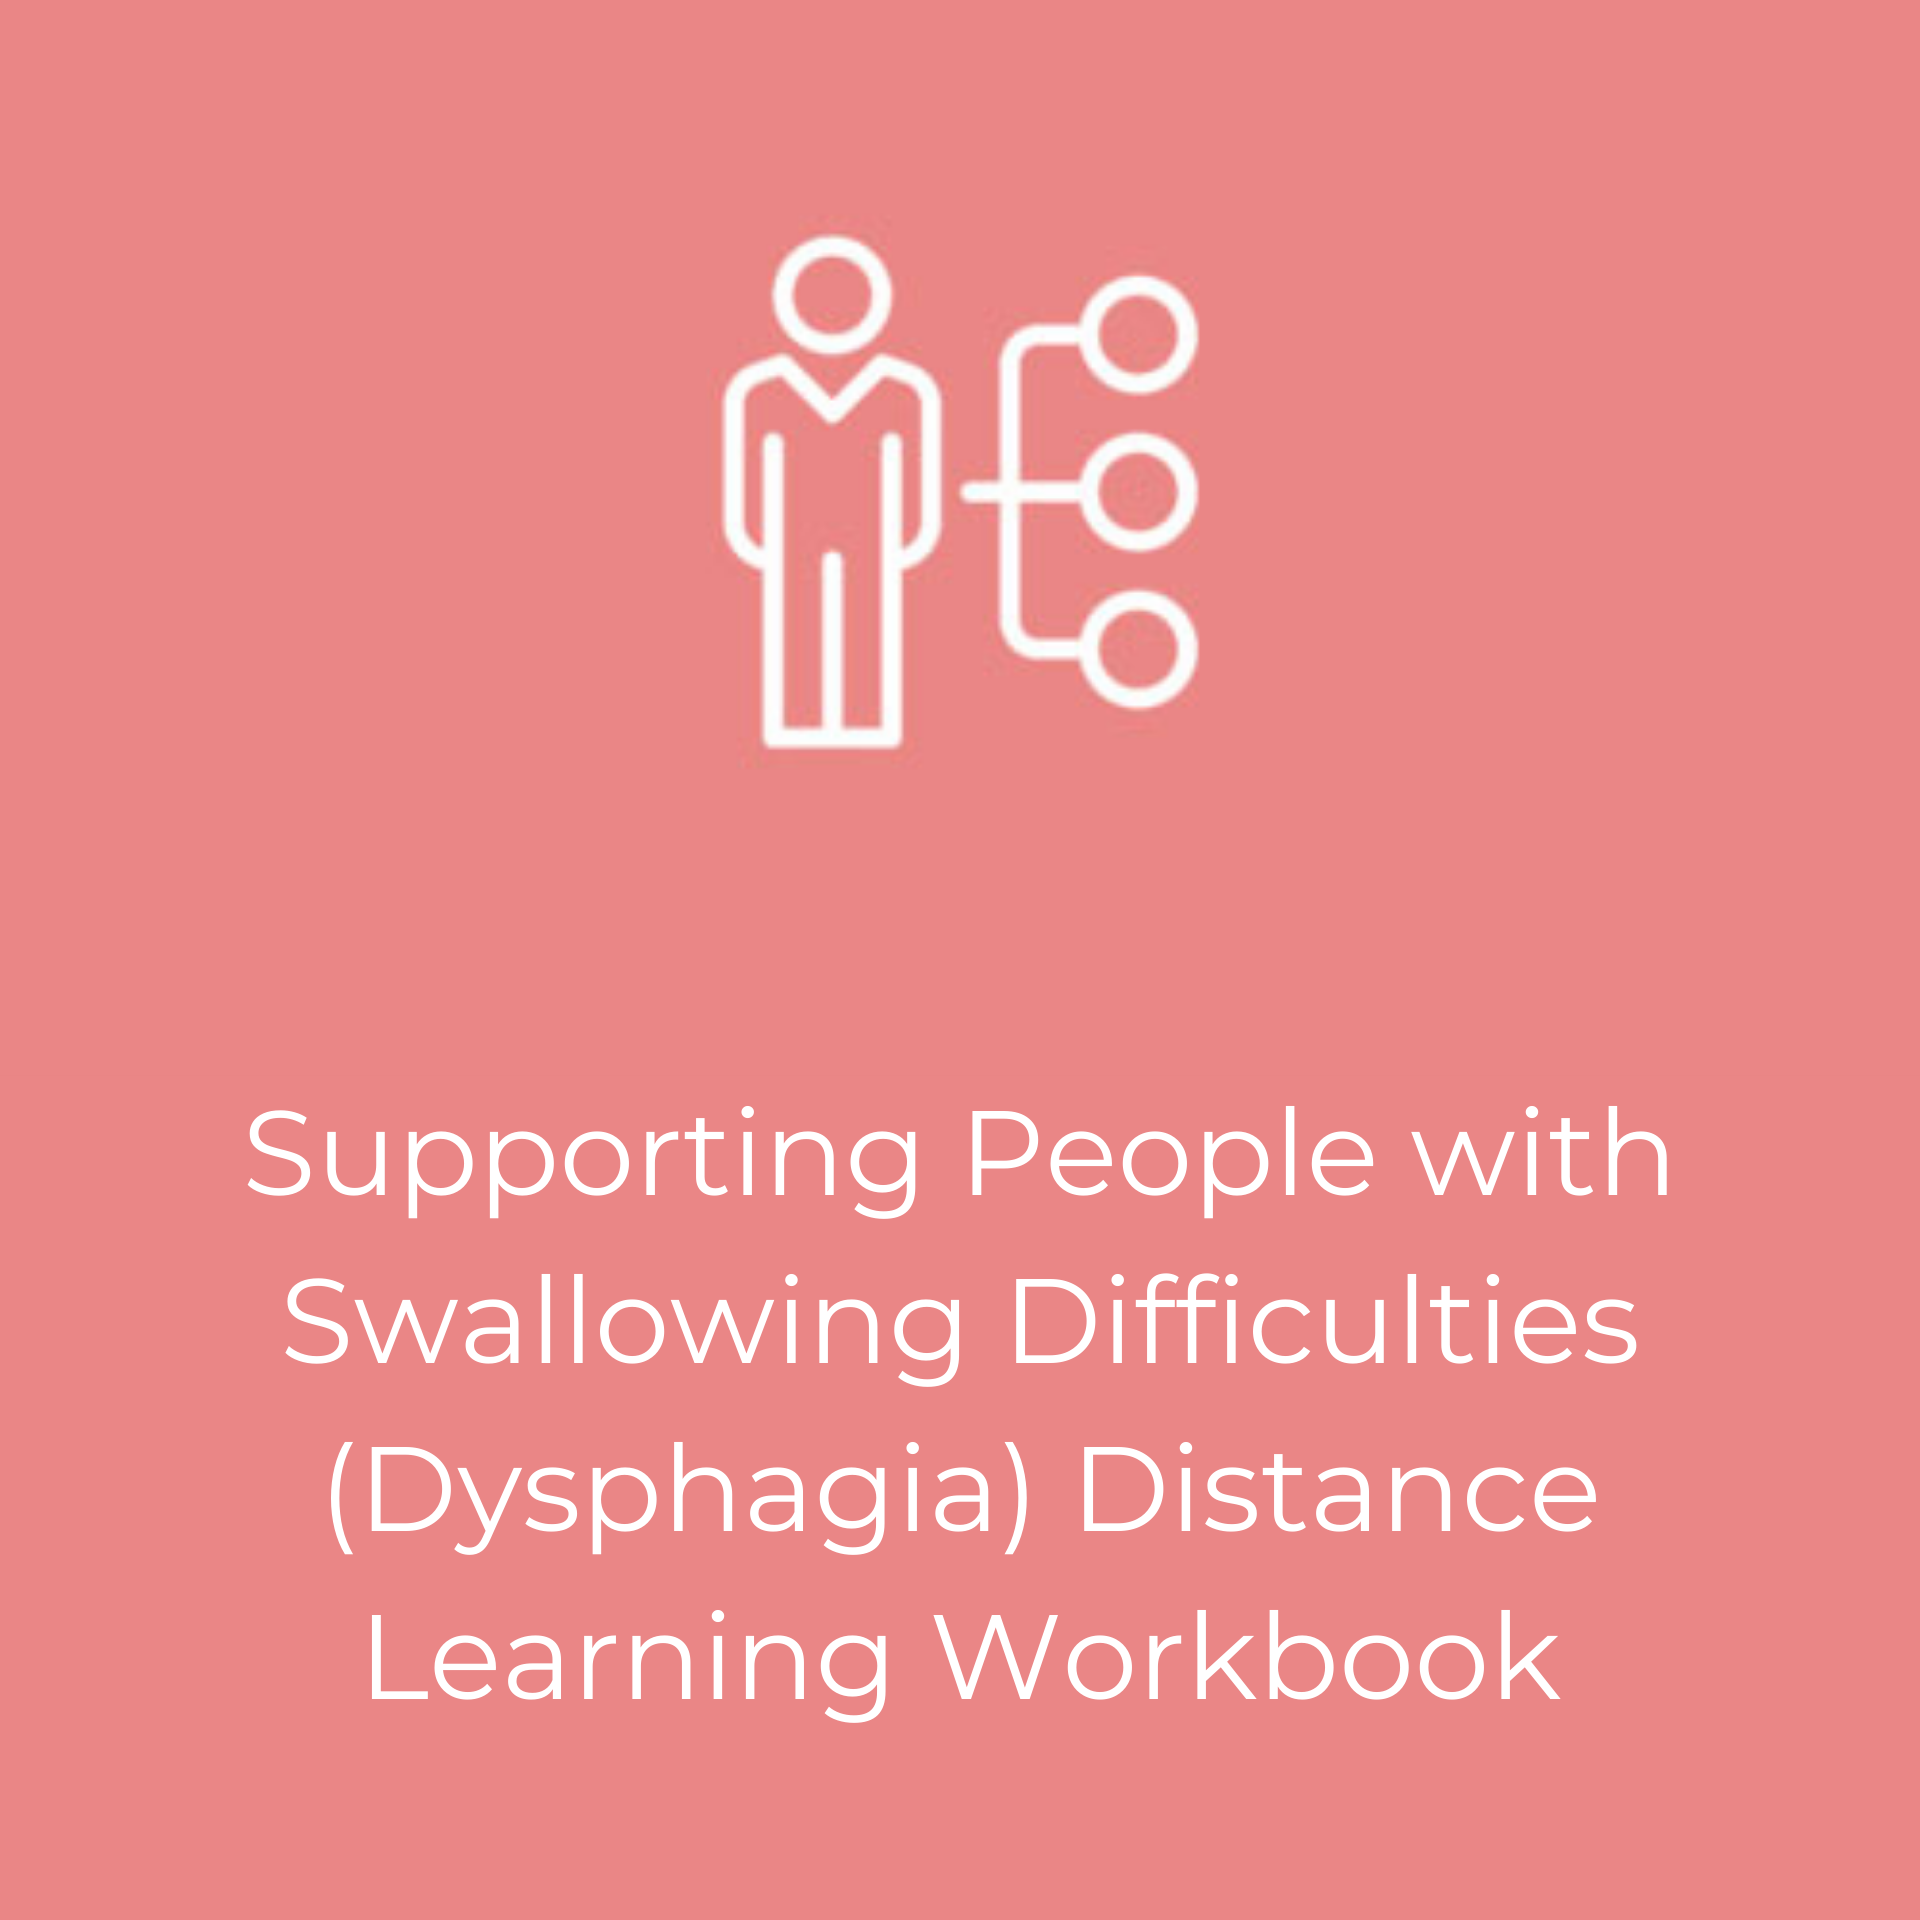 Supporting People with Swallowing Difficulties (Dysphagia) Distance Learning Workbook